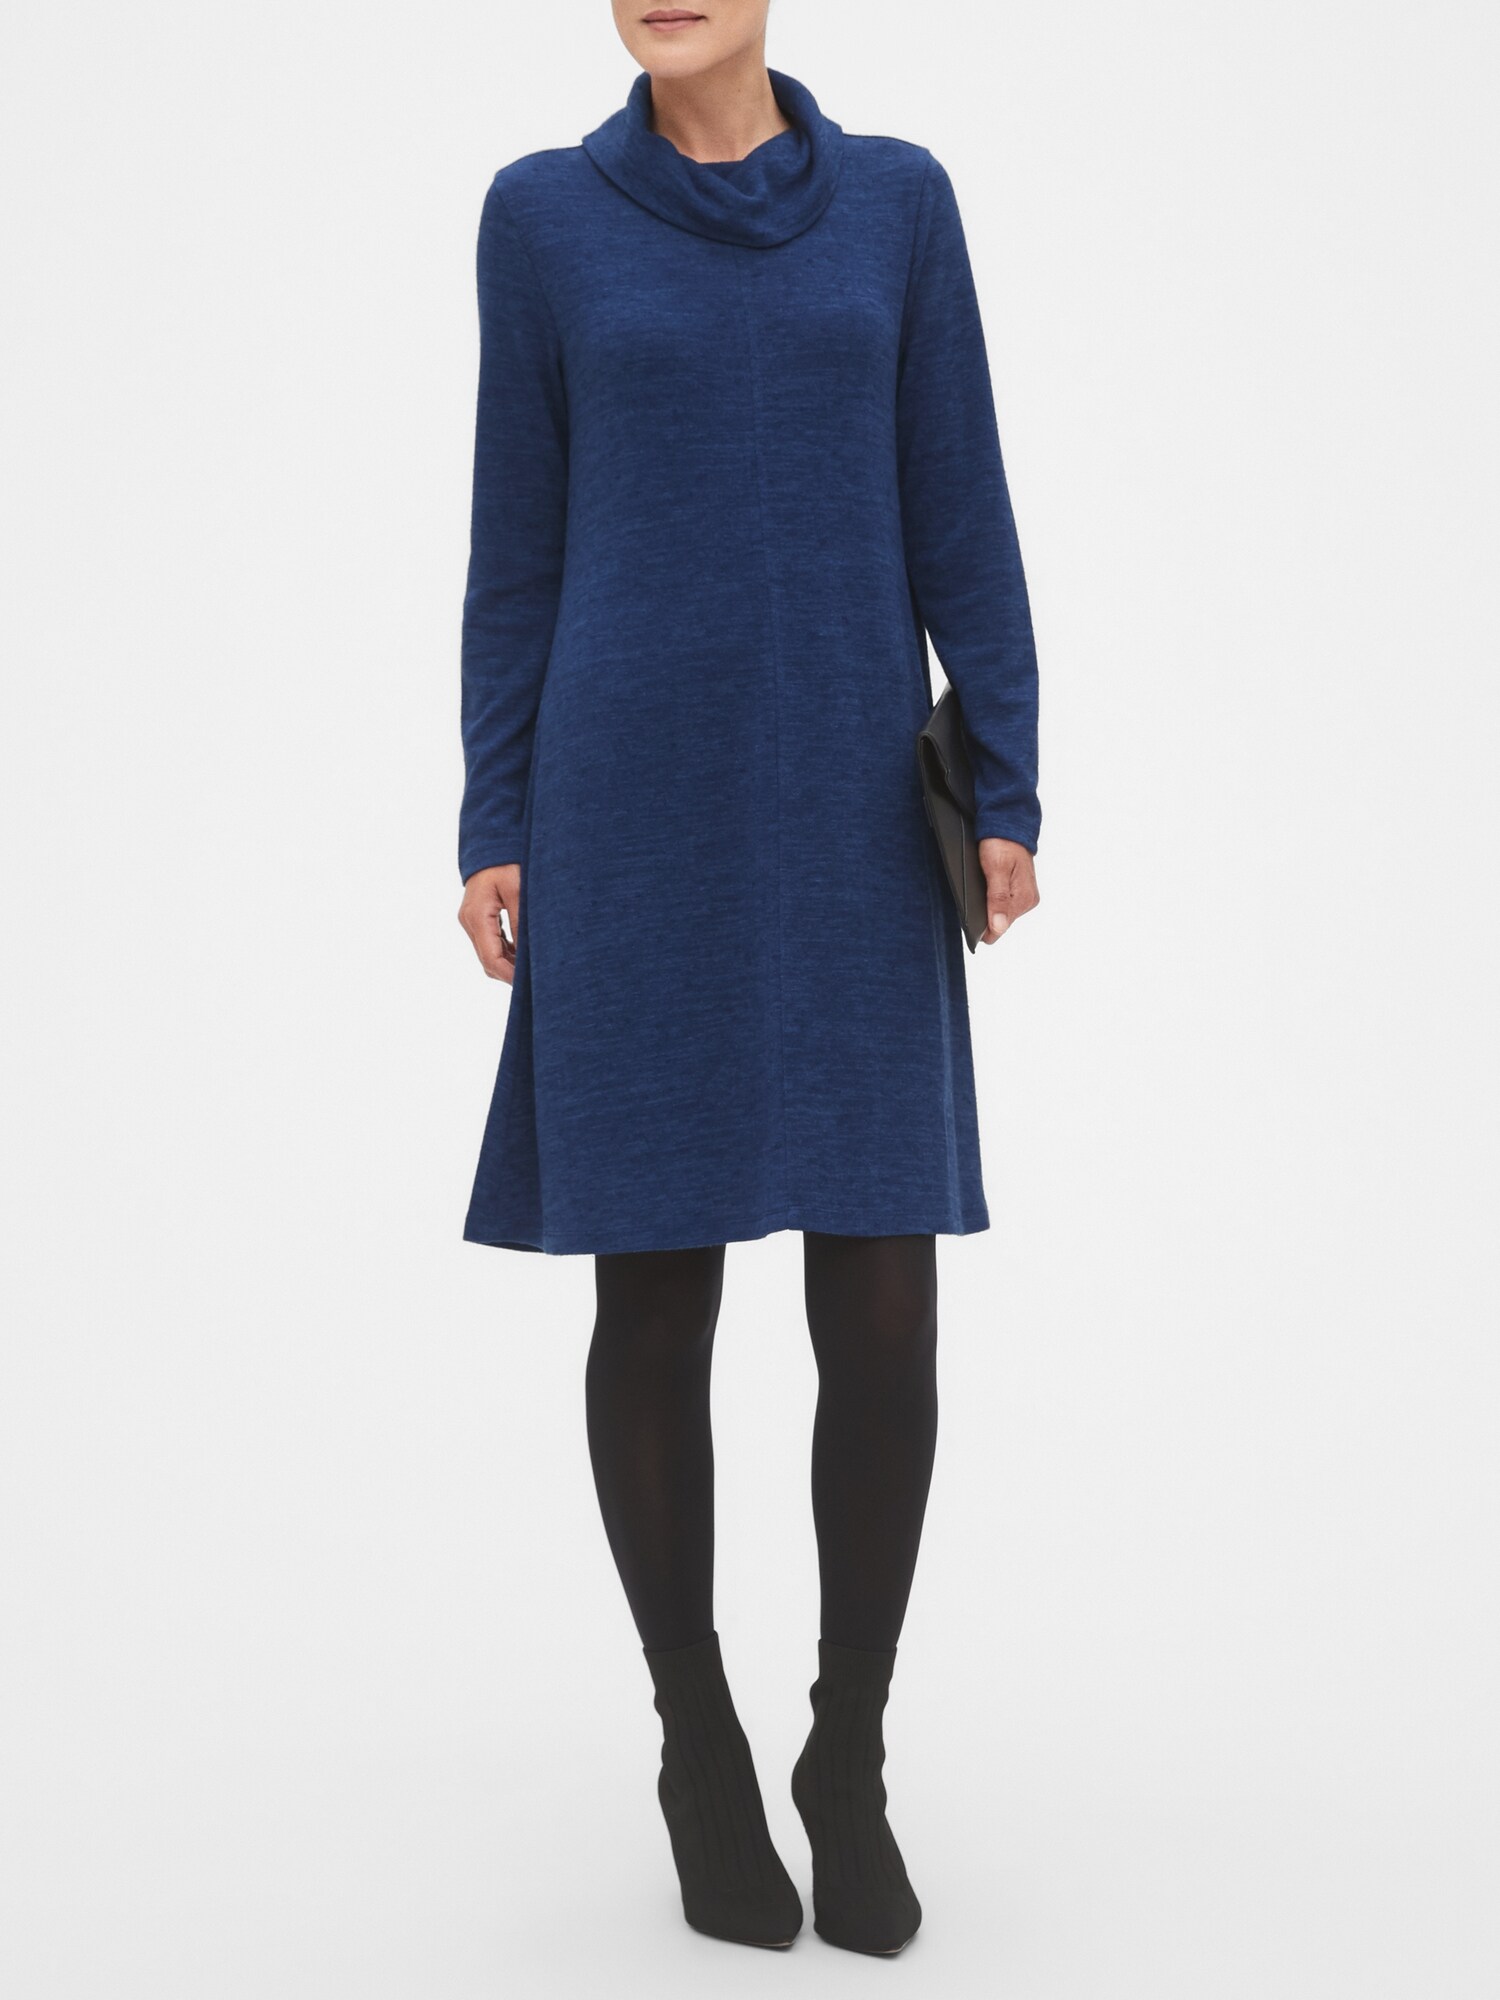 Petite Cozy Cowl-Neck Fit-and-Flare Sweater Dress